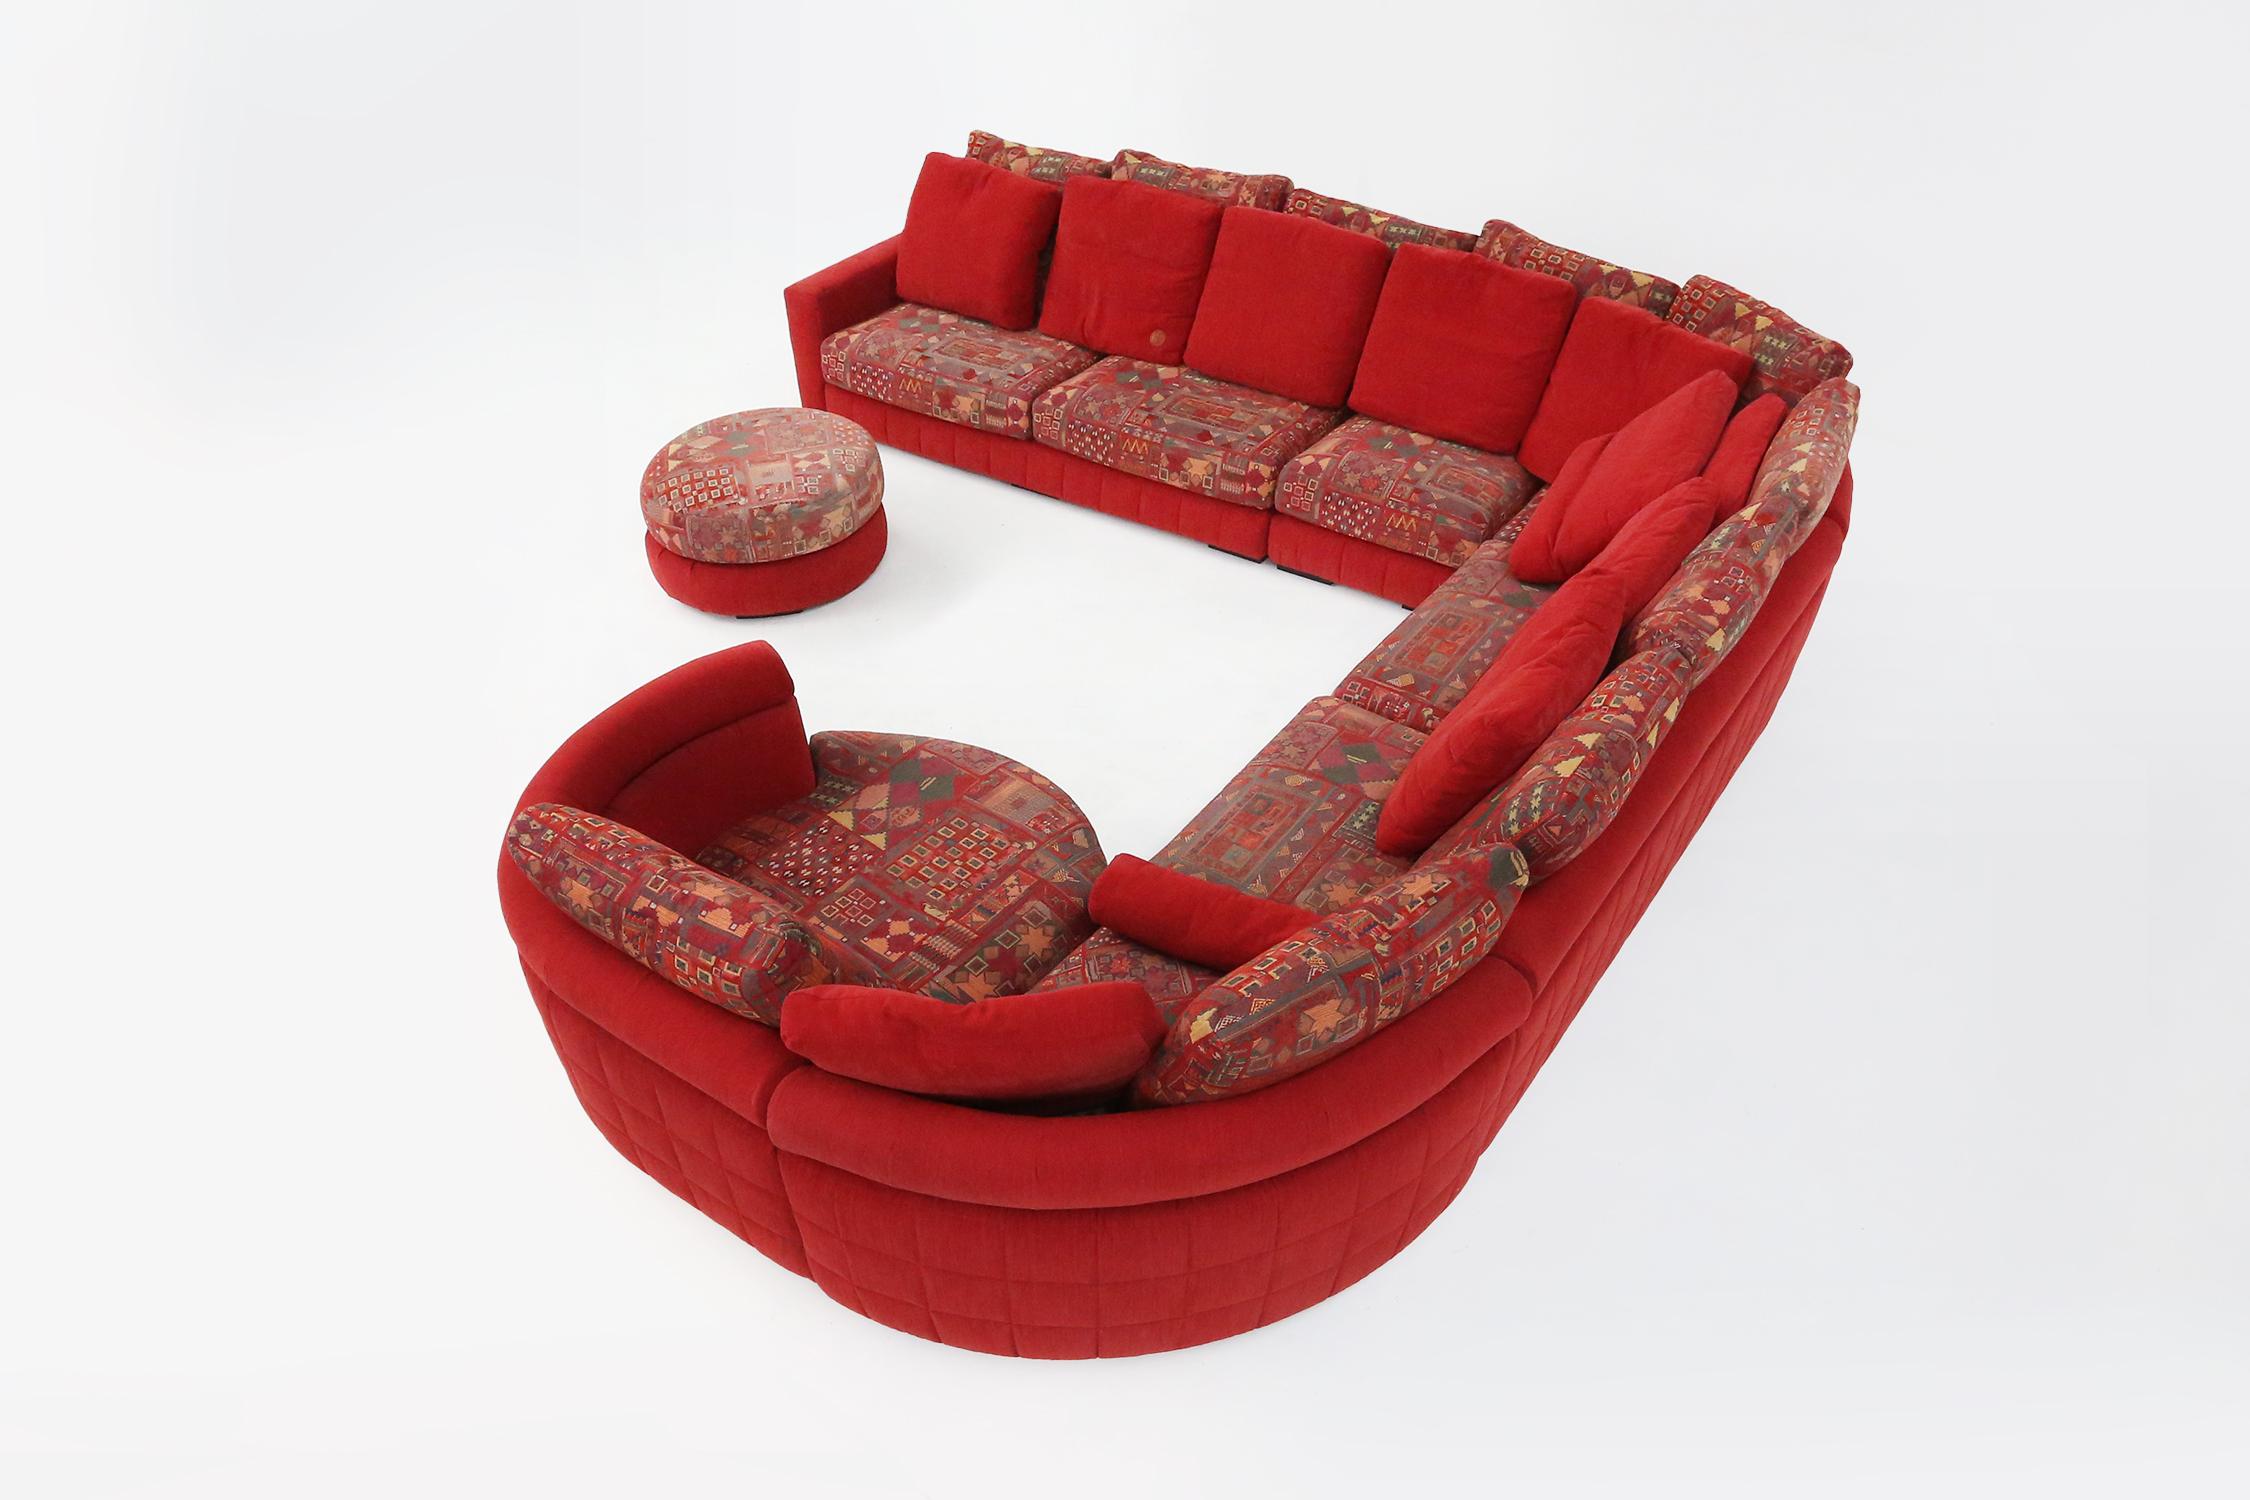 
This modular sofa from Roche Bobois is made of high-quality materials and has an elegant red upholstery that will brighten up any room.

You can customise the seat as you wish, thanks to the different seating areas that you can combine or use